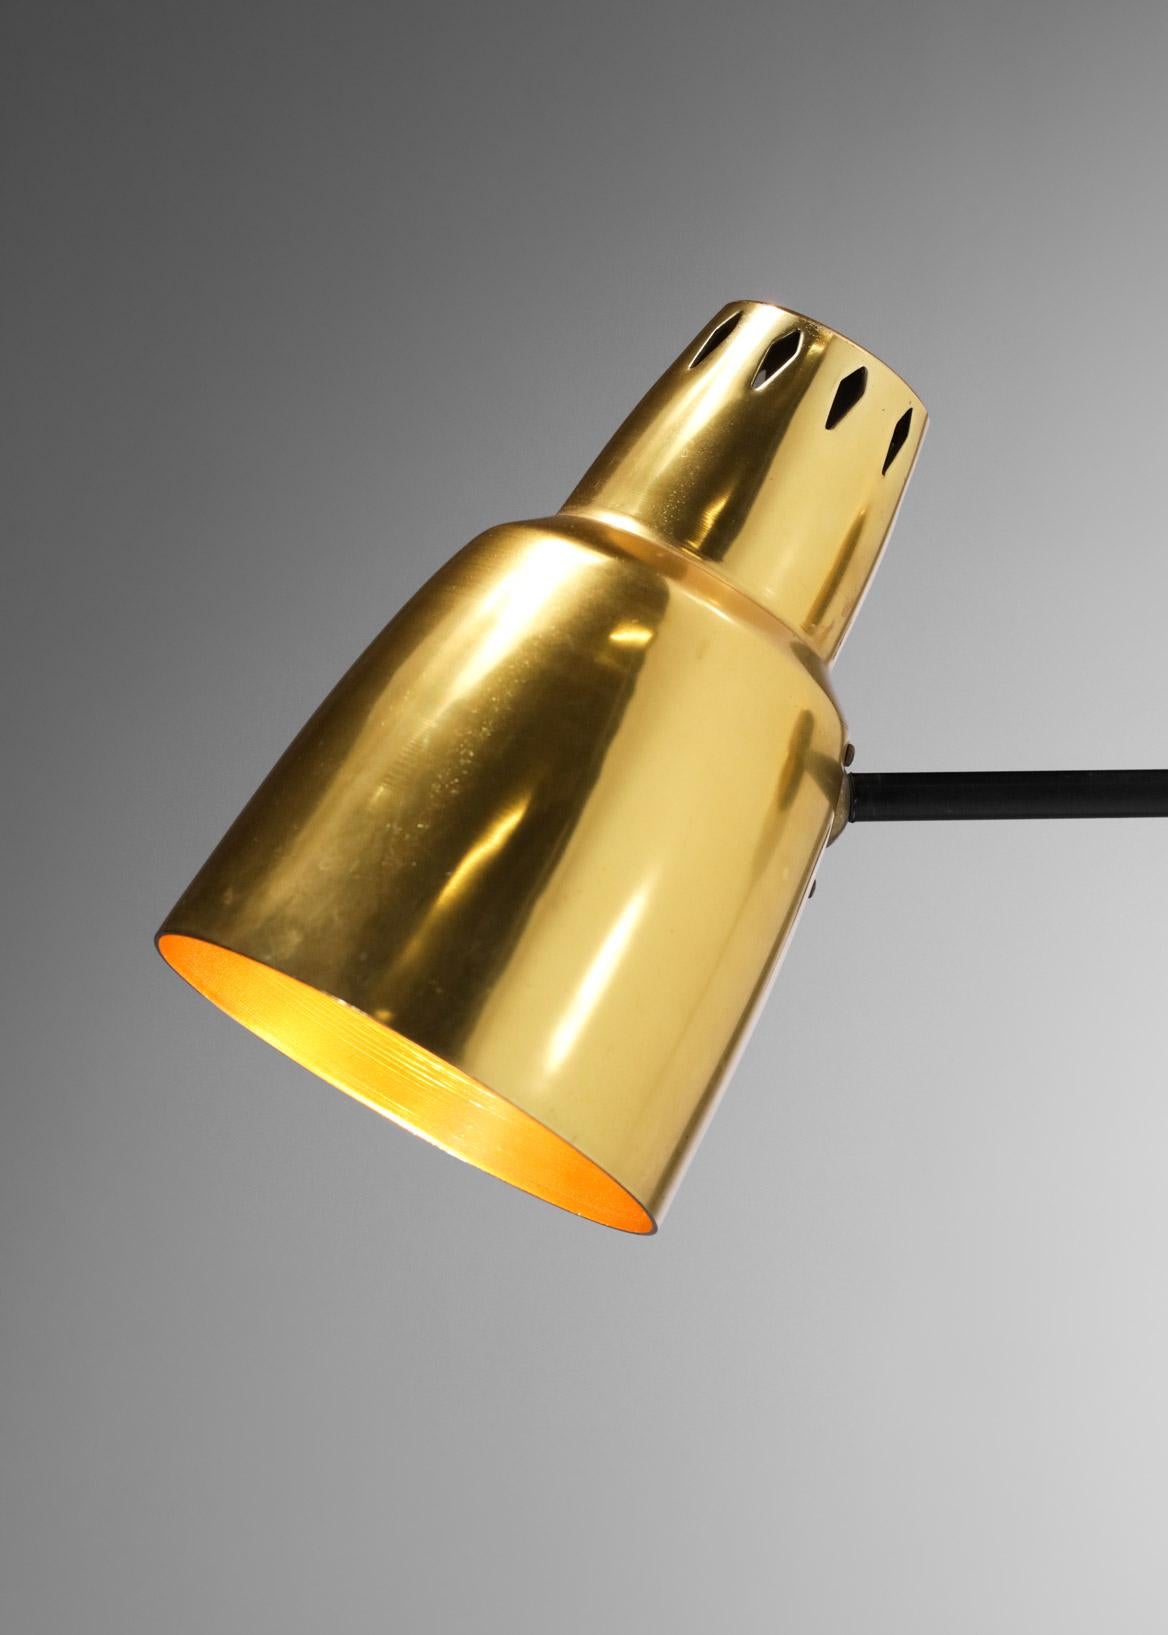 Parscot 60's Vintage Gilded Wall Lamp in Solid Brass In Good Condition For Sale In Ternay, Auvergne-Rhône-Alpes